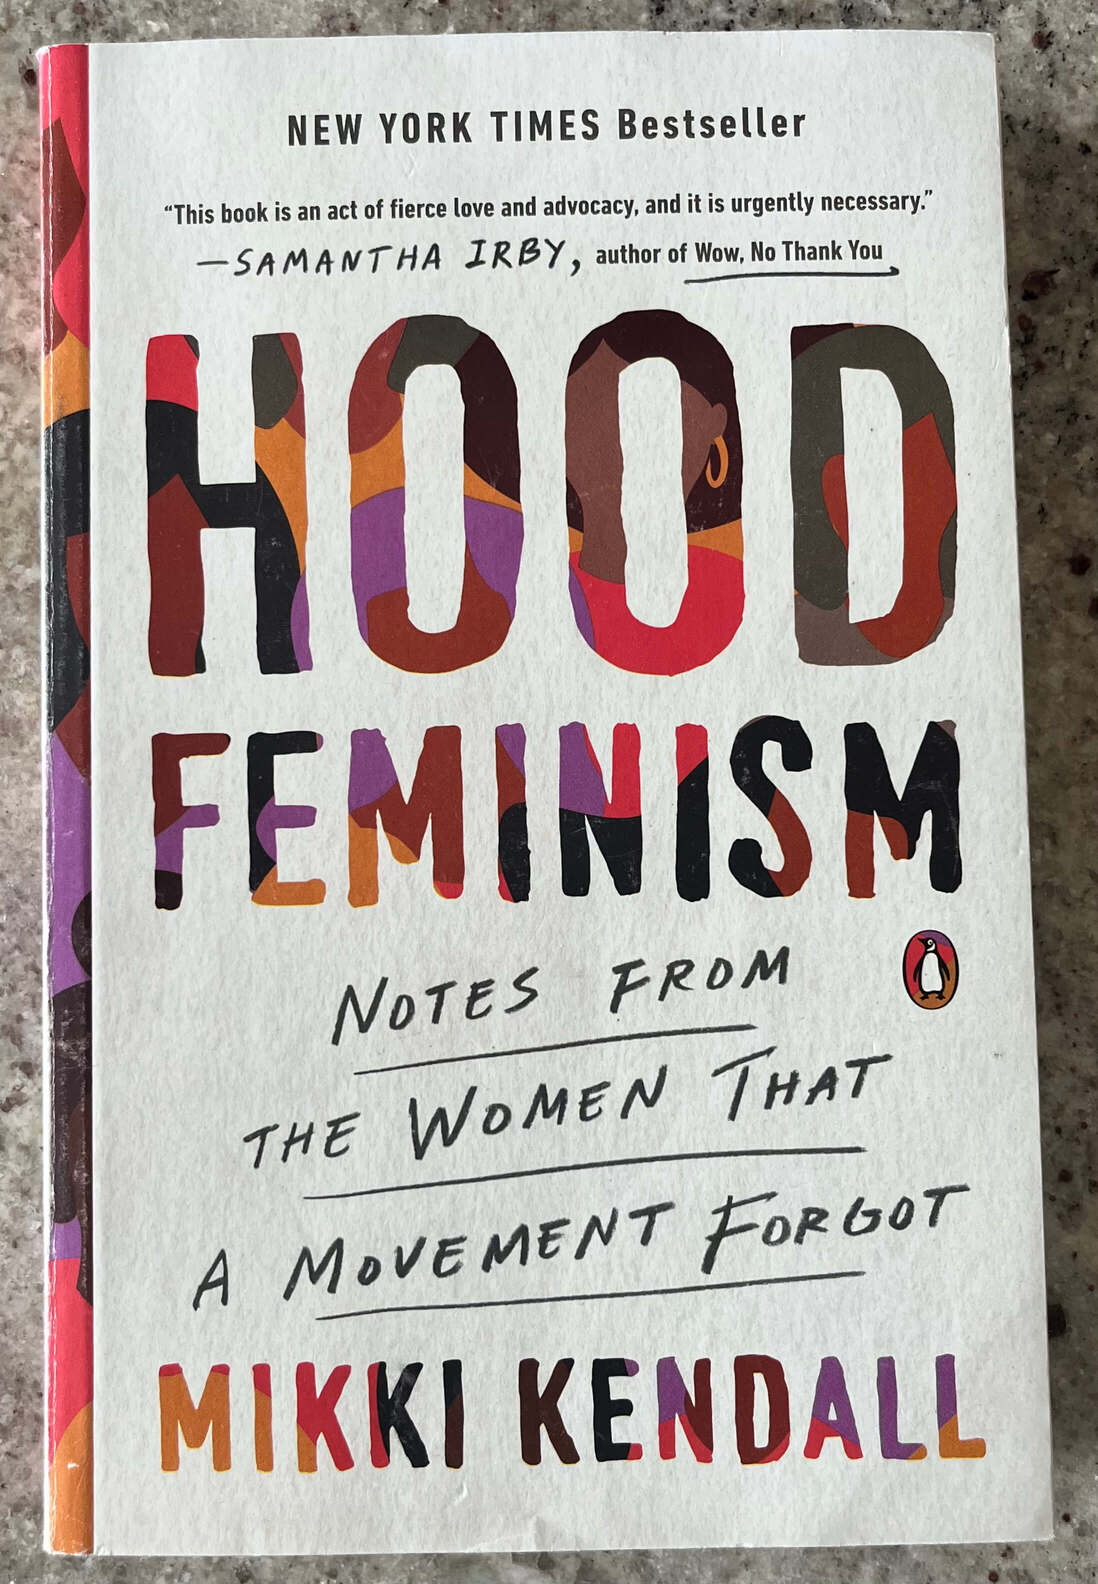 “Hood Feminism: Notes from the Women that a Movement Forgot” by Mikki Kendall.